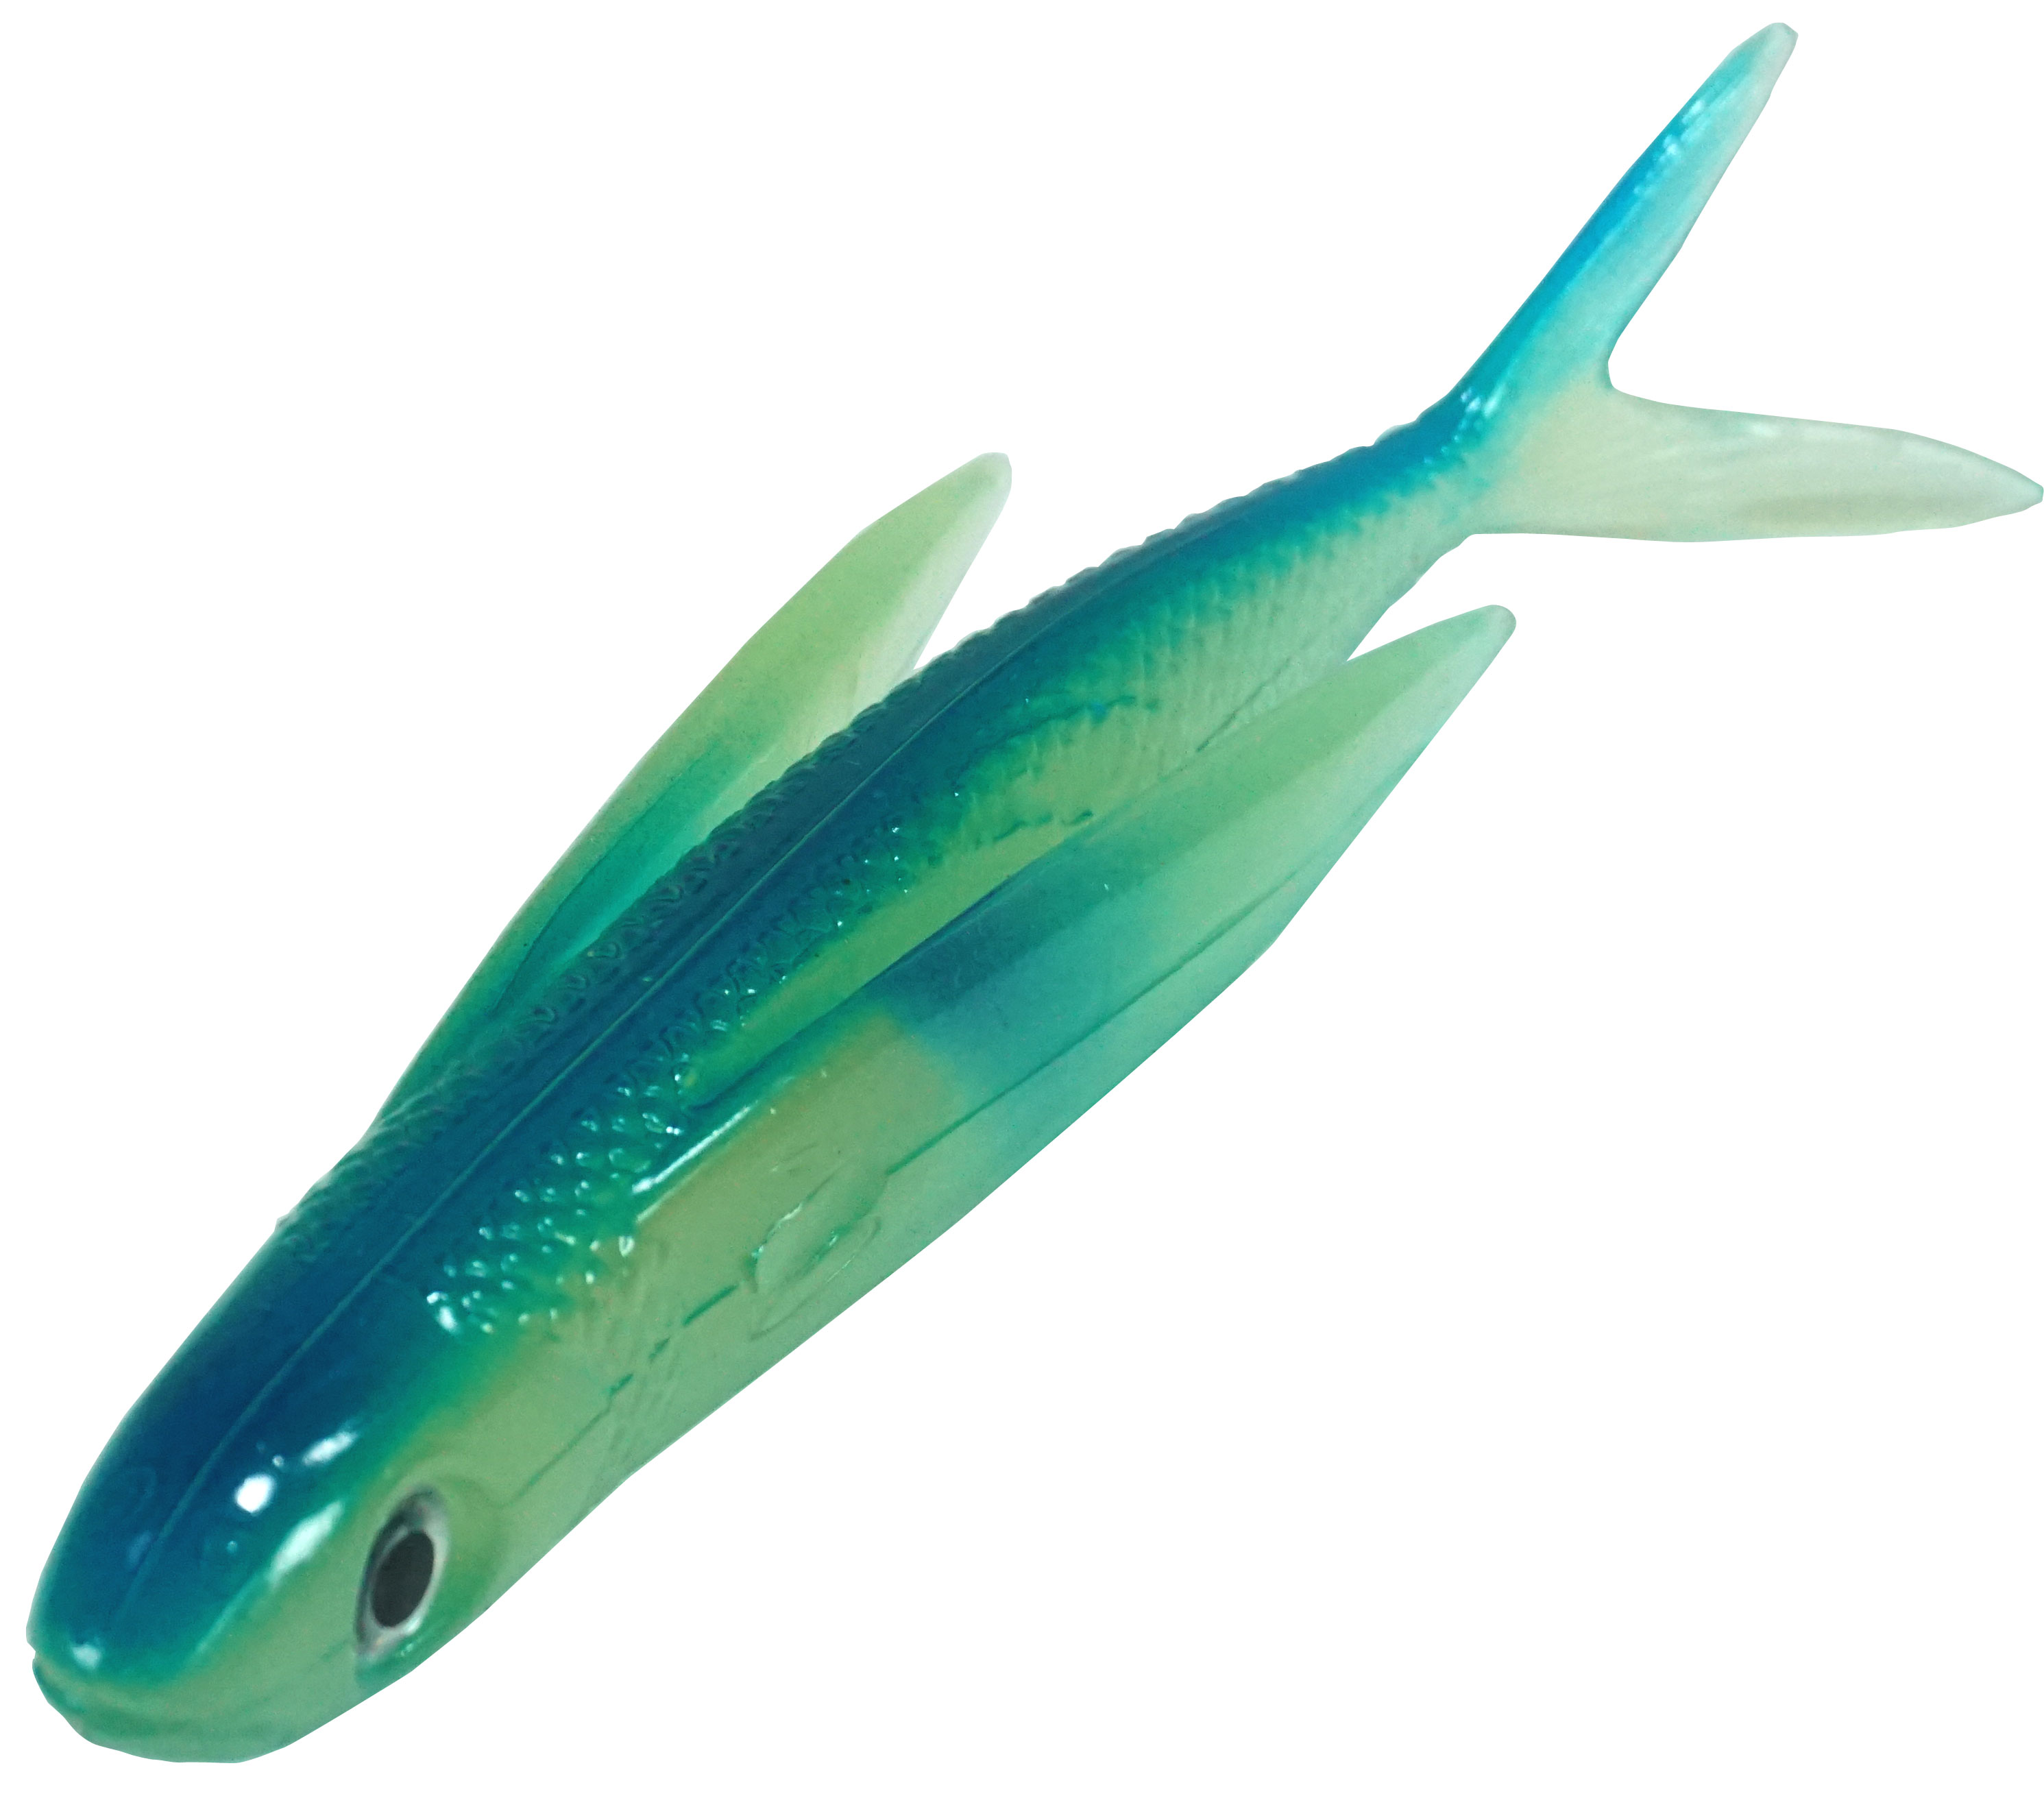 Almost Alive Lures 6" Soft Plastic Flying Fish with Swept Back Wing Bait Bright Blue/Glow